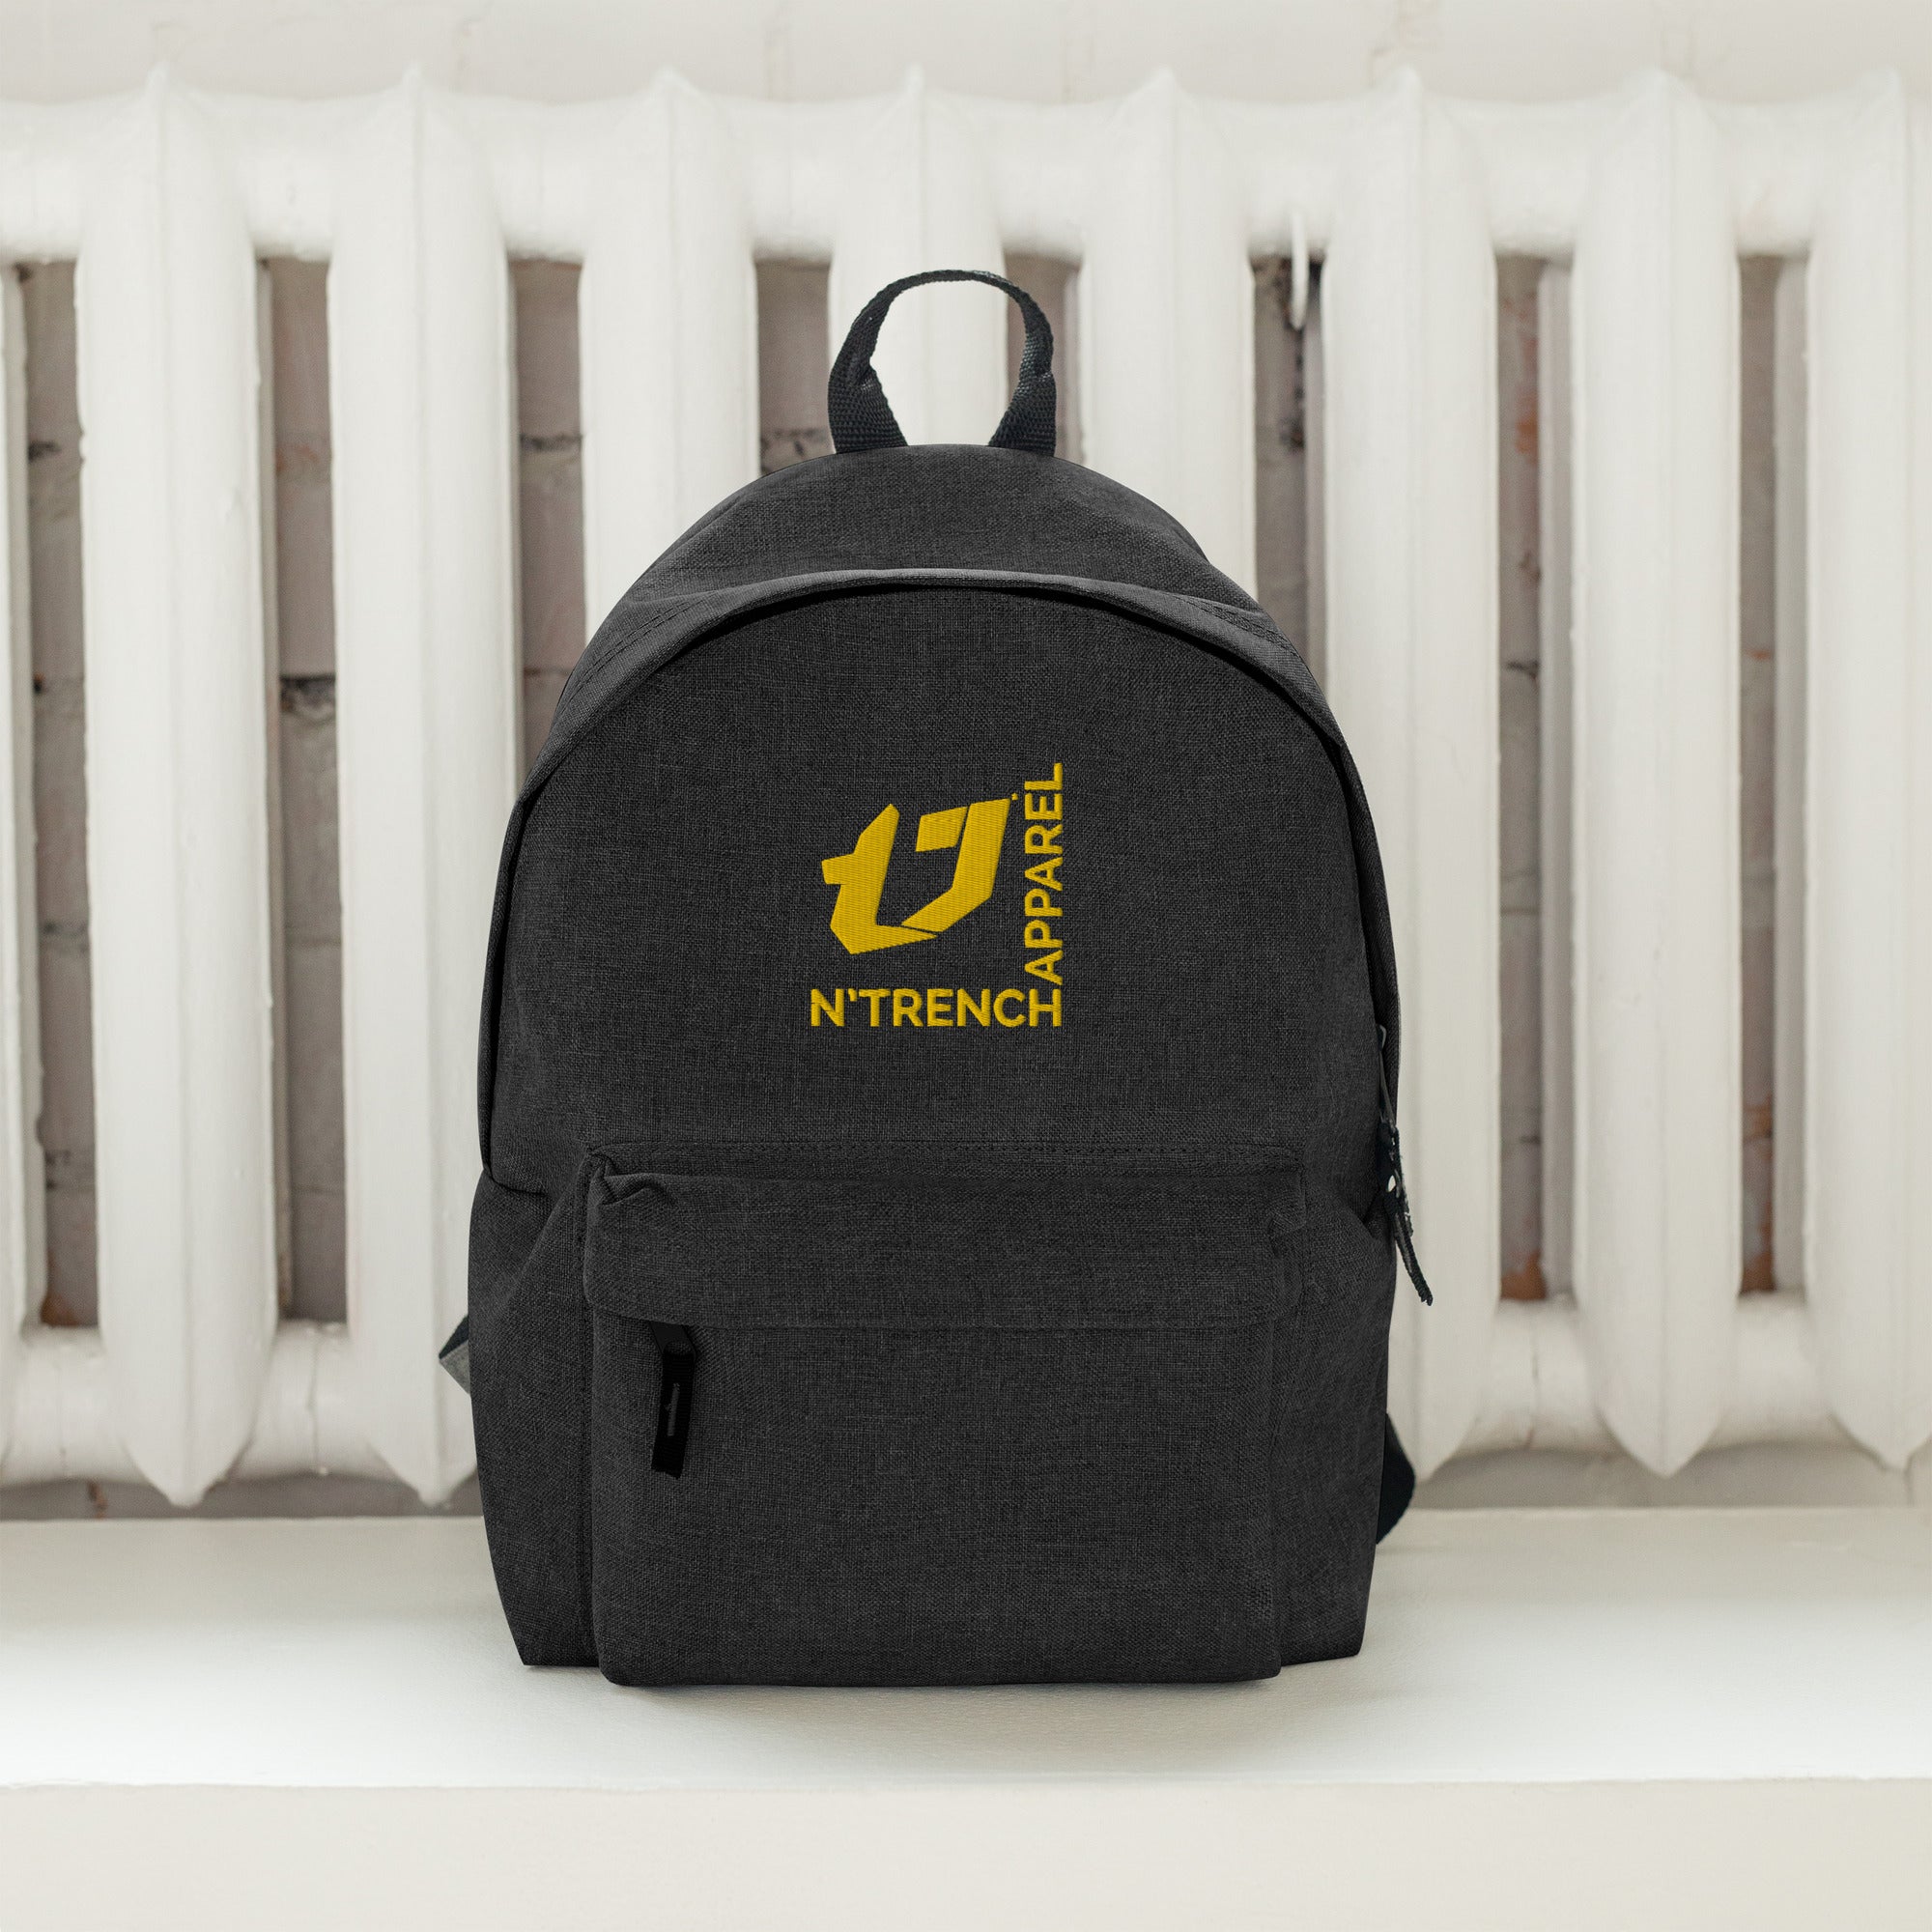 N'Trench Apparel Gold Lettering And Logo Embroidered Backpack